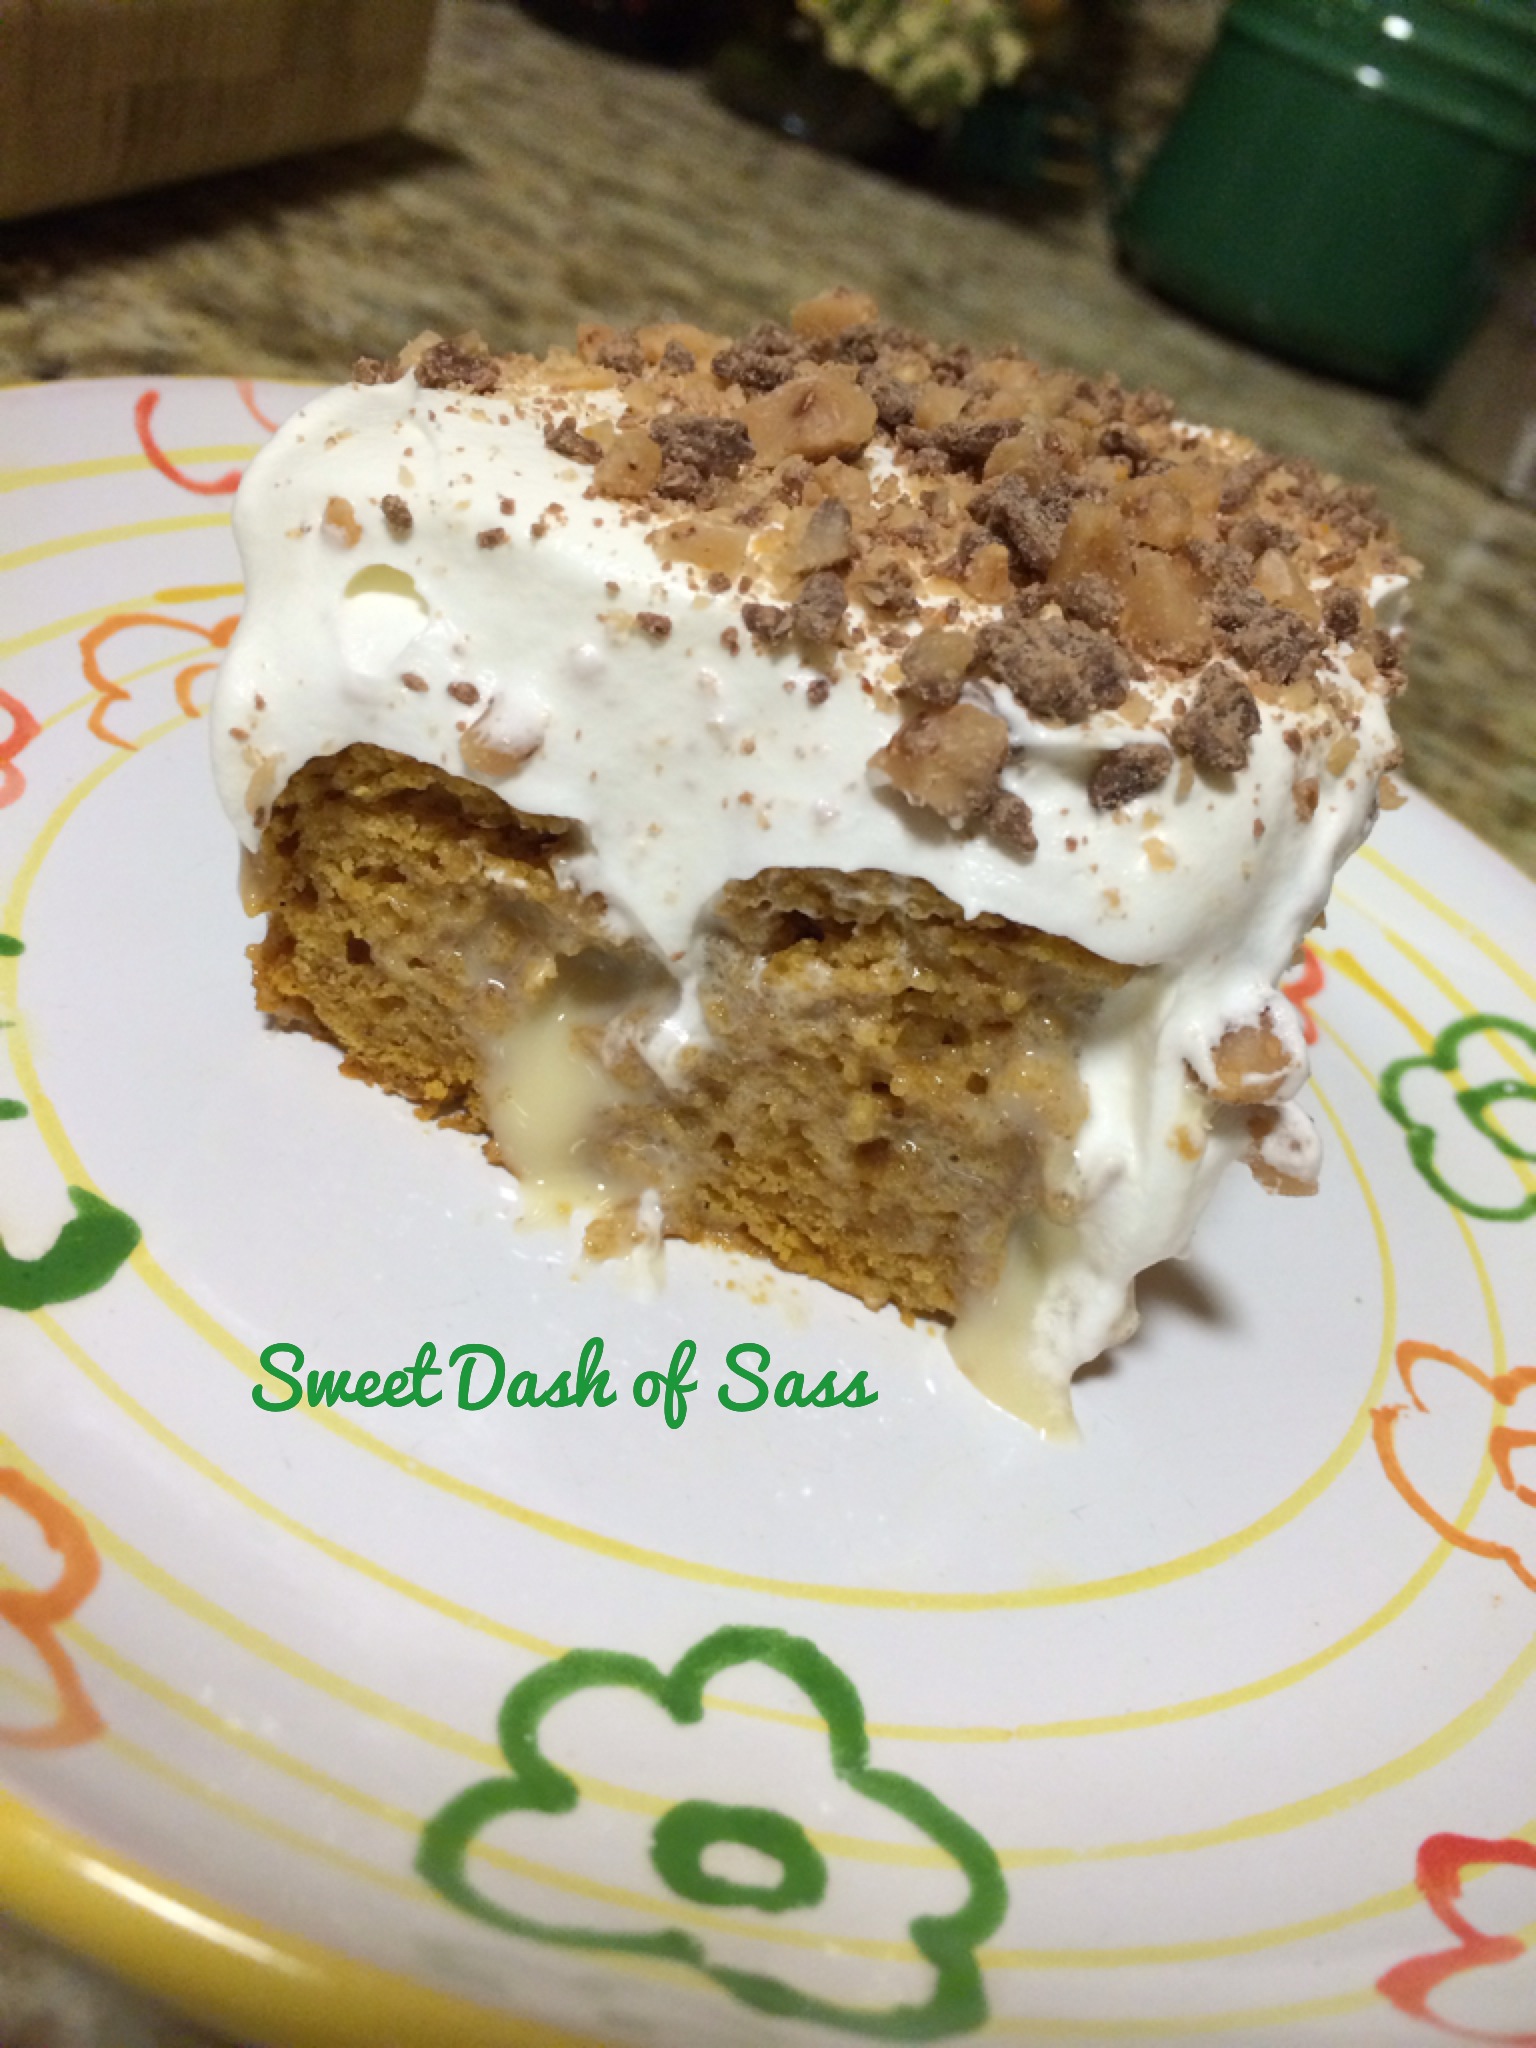 Pumpkin Poke Cake - www.SweetDashofSass.com -  'LIKE' Sweet Dash of Sass on Facebook to  Check out this recipe and many more!